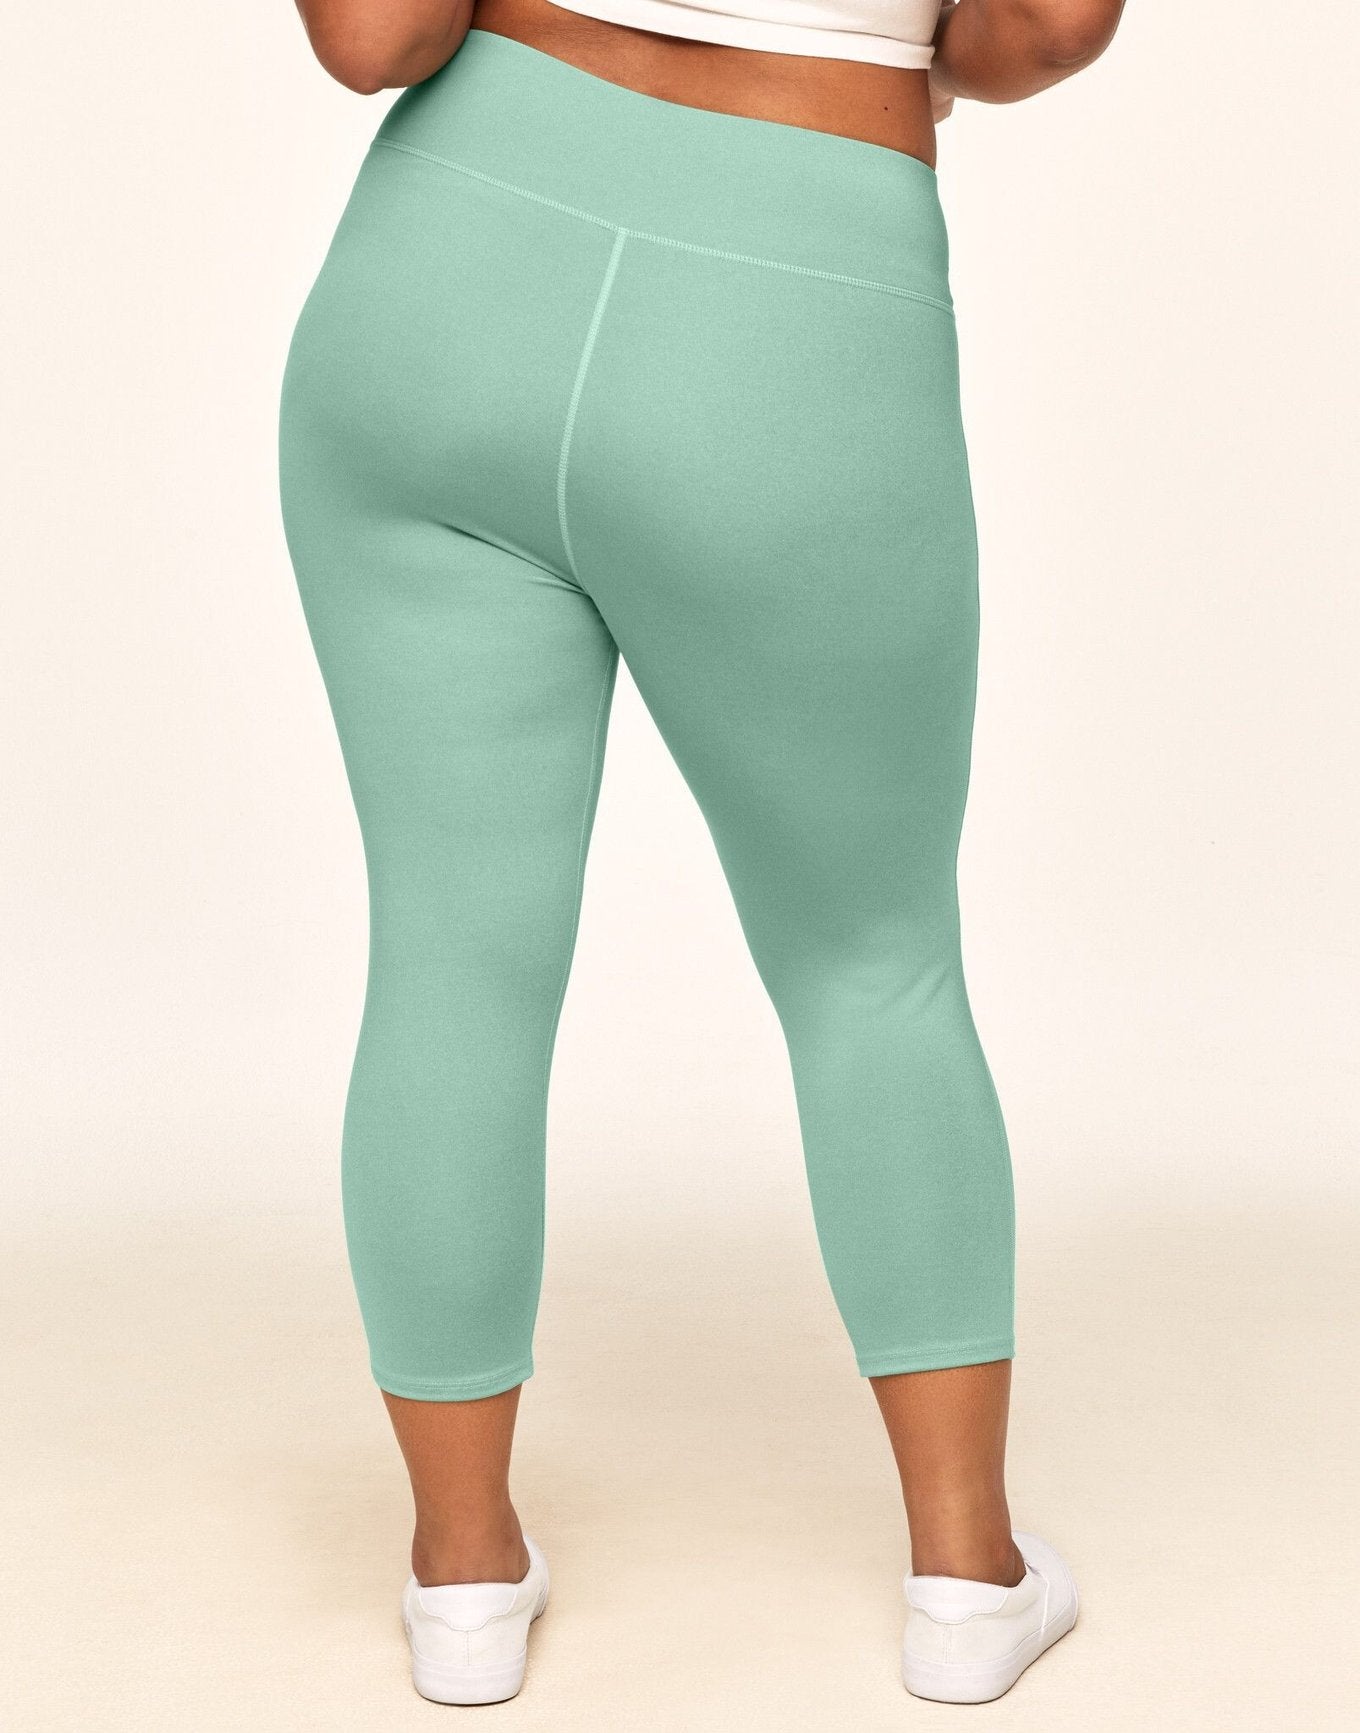 Adore Me Haley Heathered Crop Heather Compression Activewear Crop Legging in color Green Come True Heather and shape legging